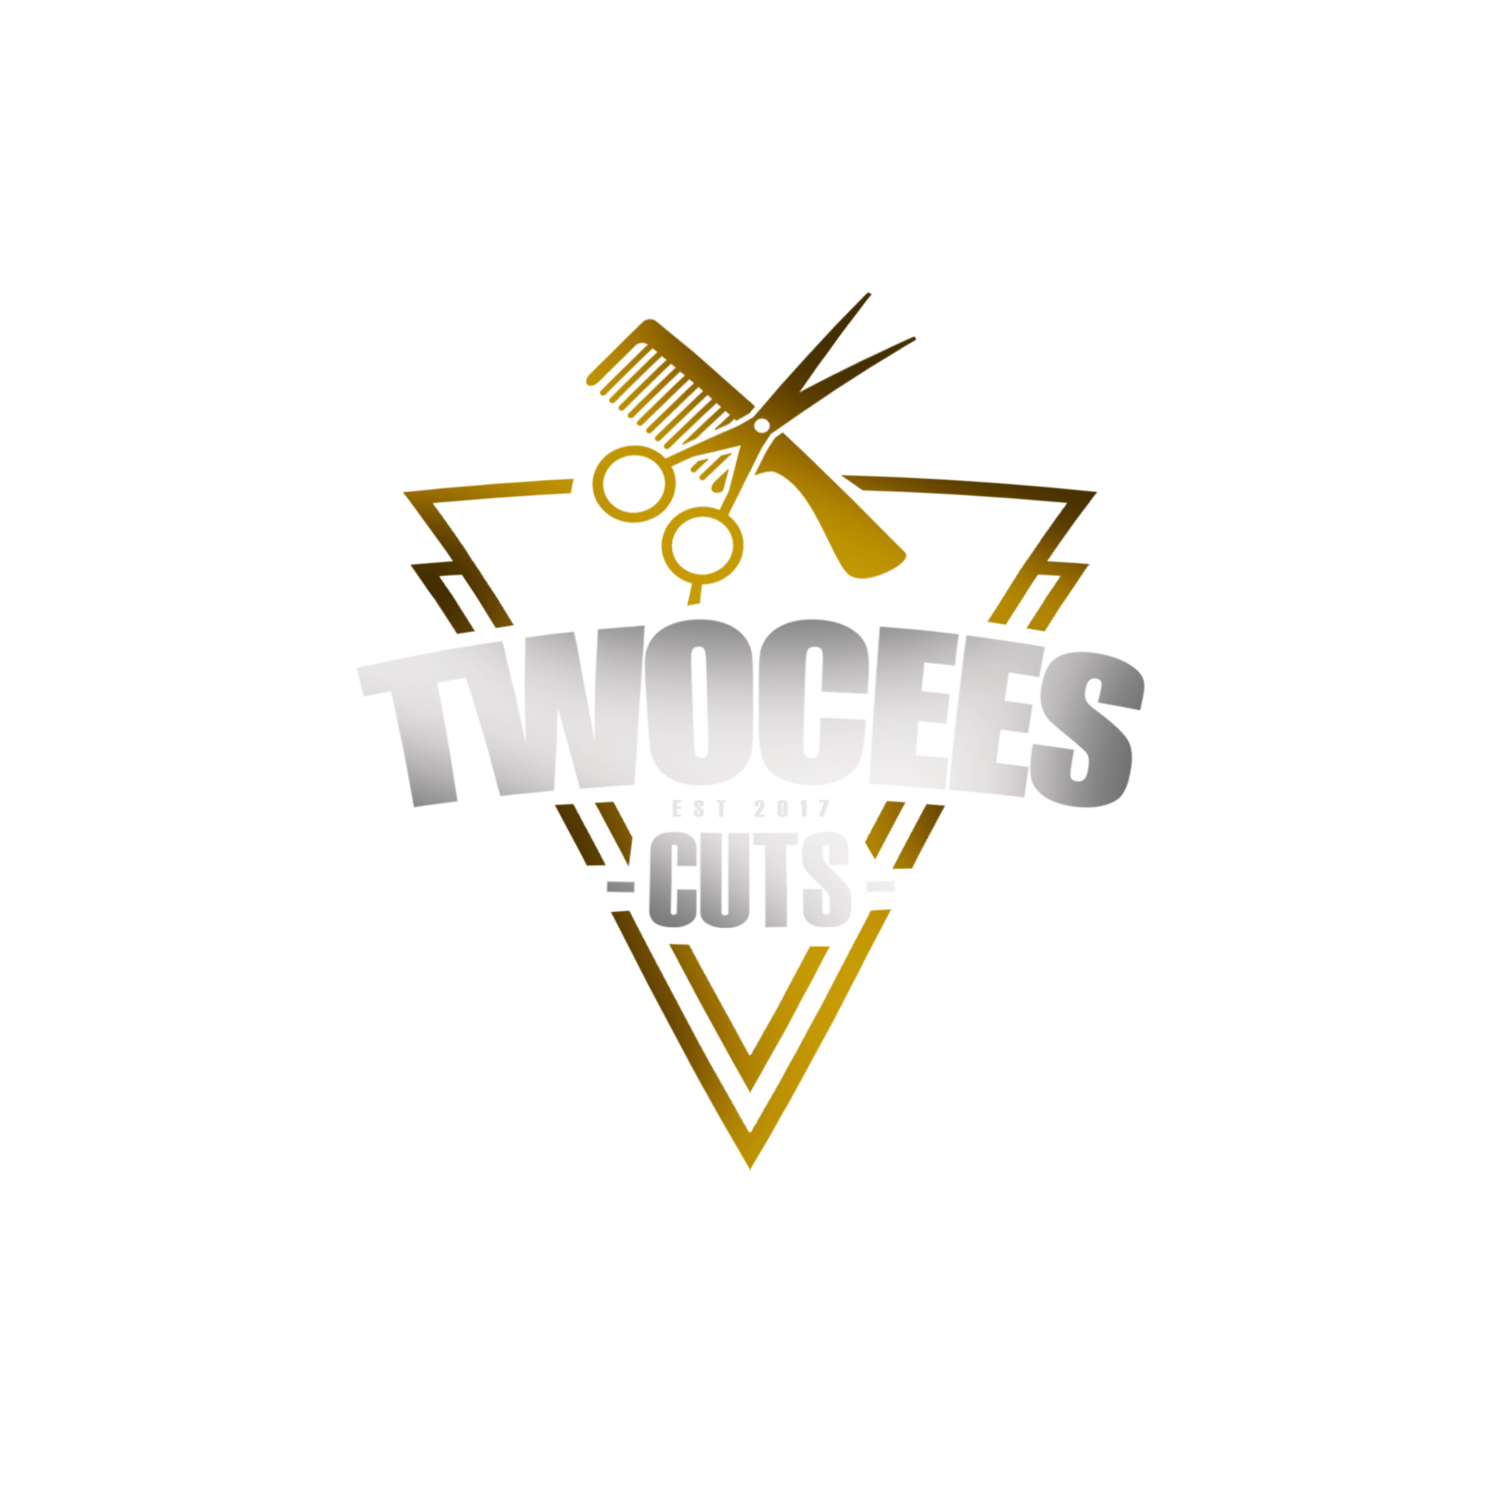 TWOCEES CUTS